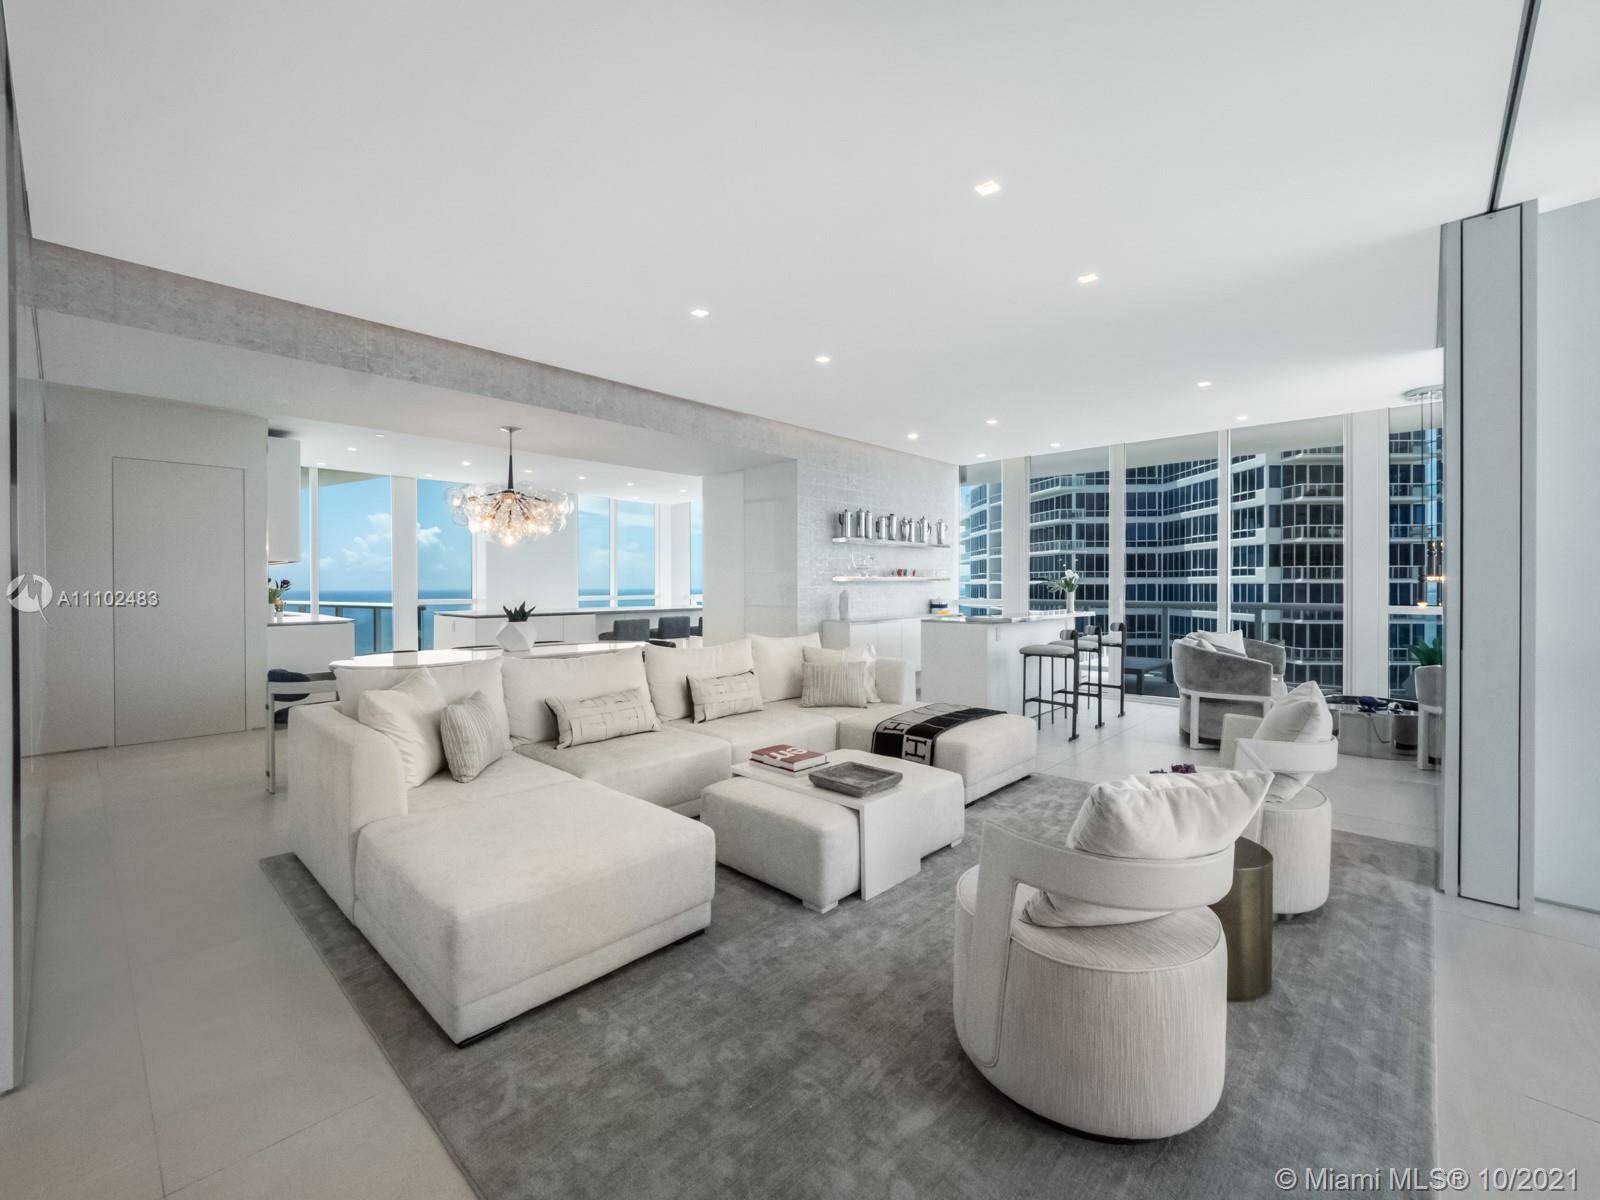 A modern oceanfront paradise in the heart of the city, this residence was completely renovated with no expense spared.